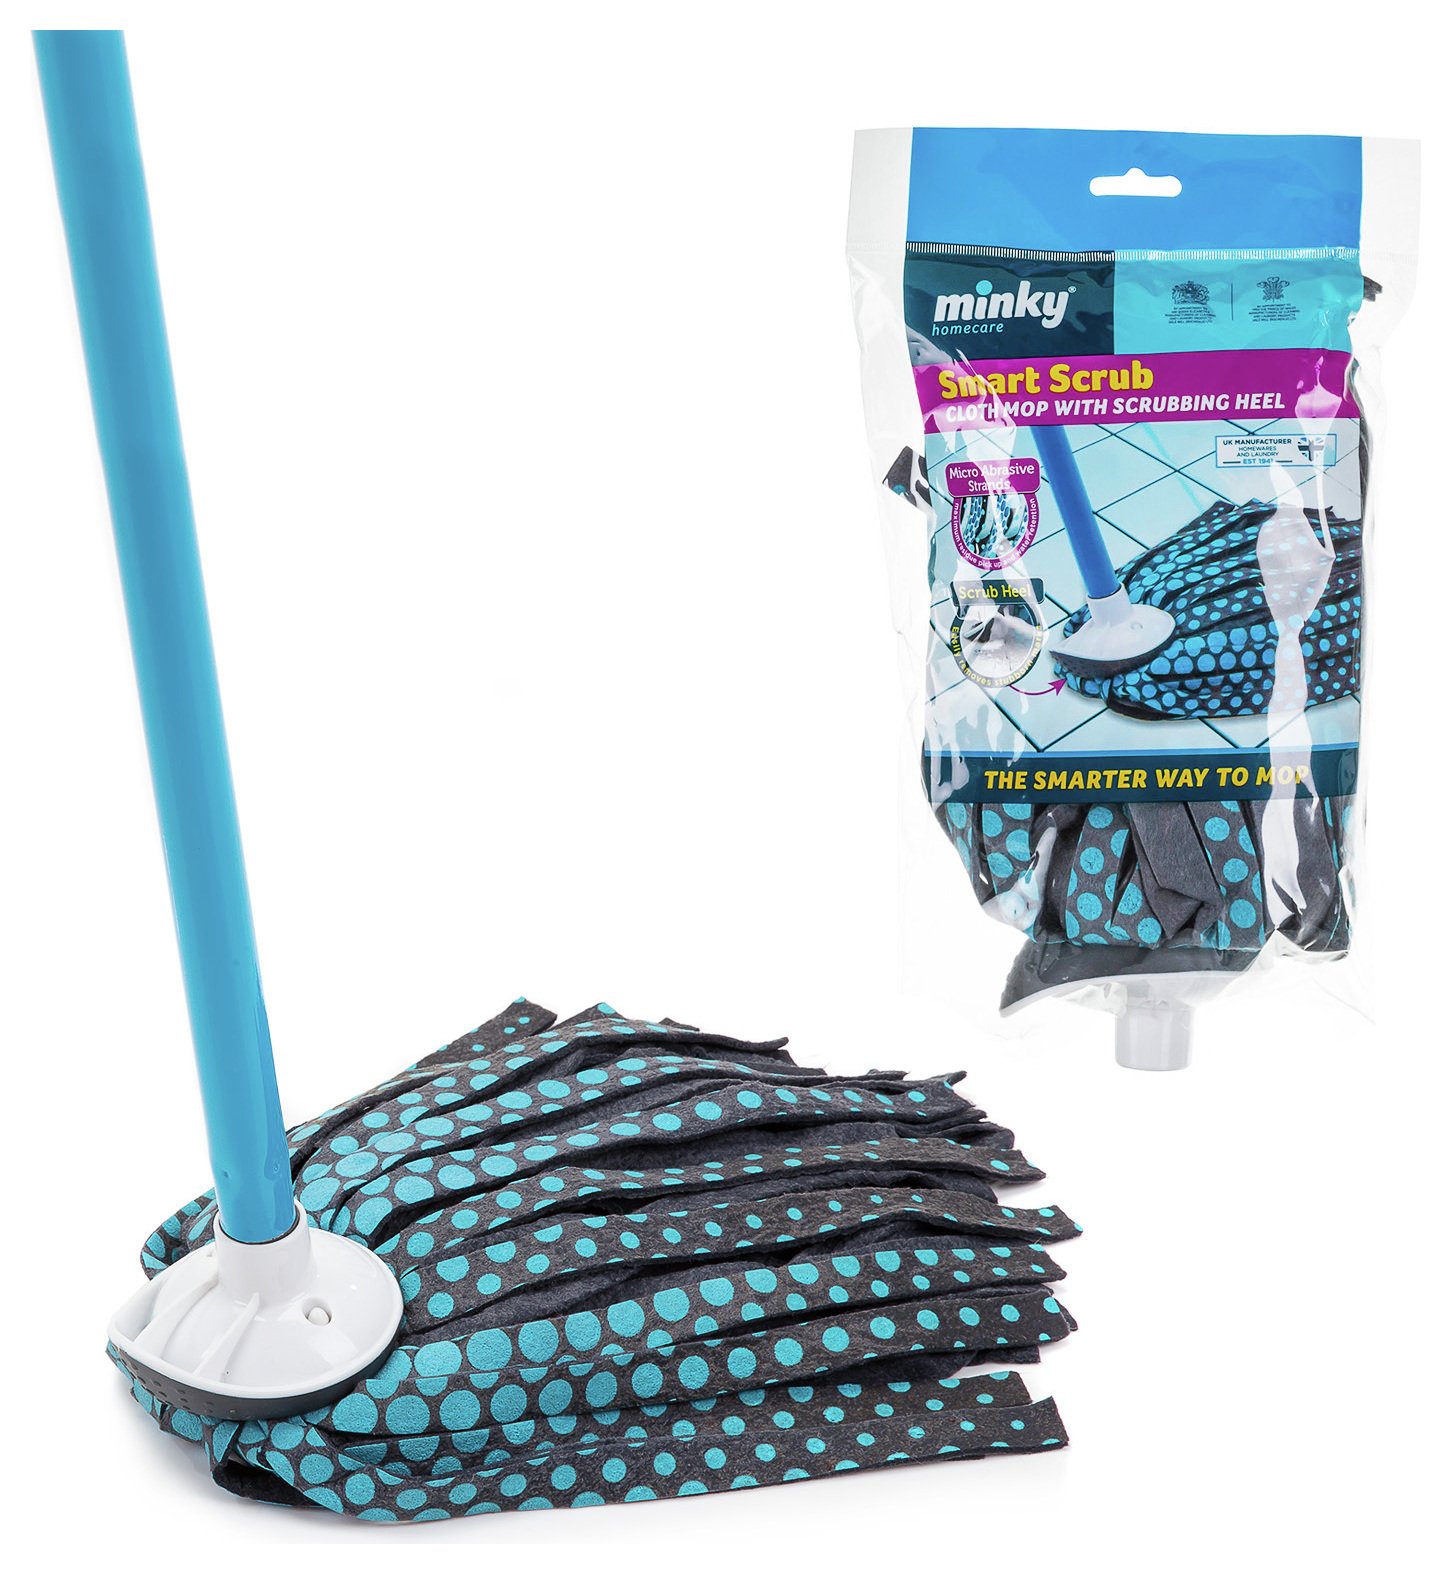 Minky Smart Scrub Strip Mop and Replacement Head.